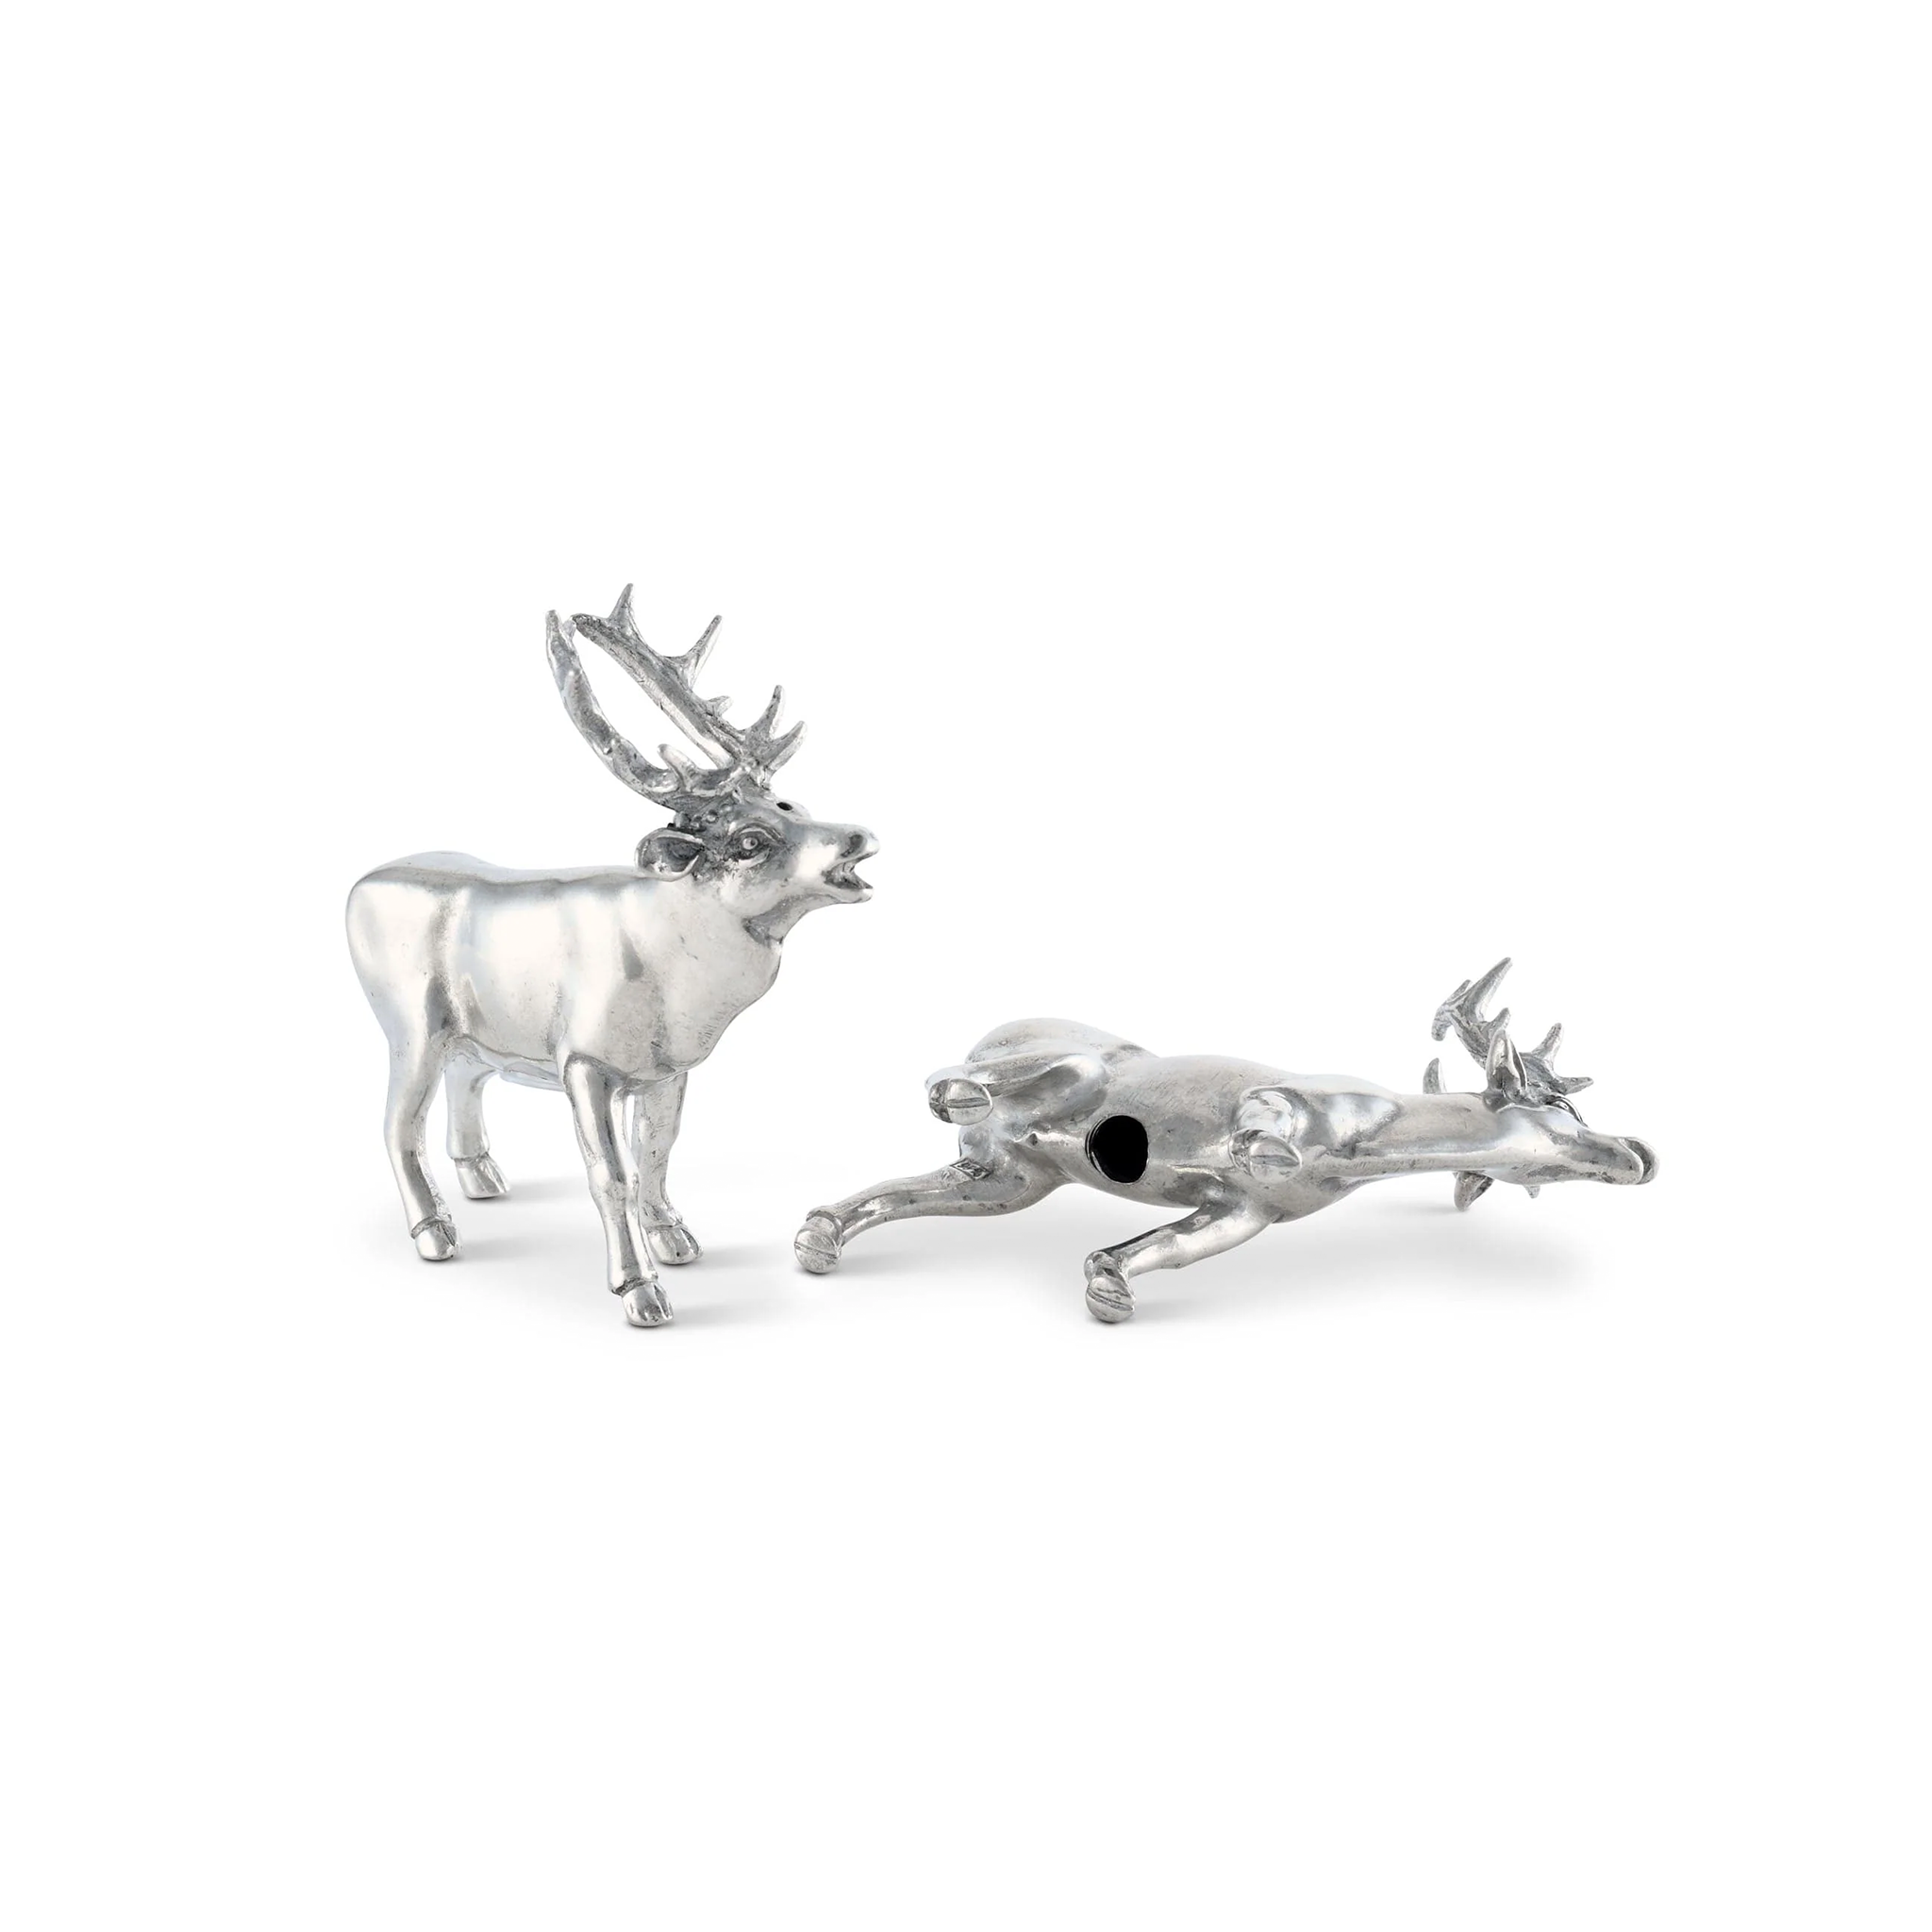 a pair of pewter deer salt and pepper shakers standing next to each other